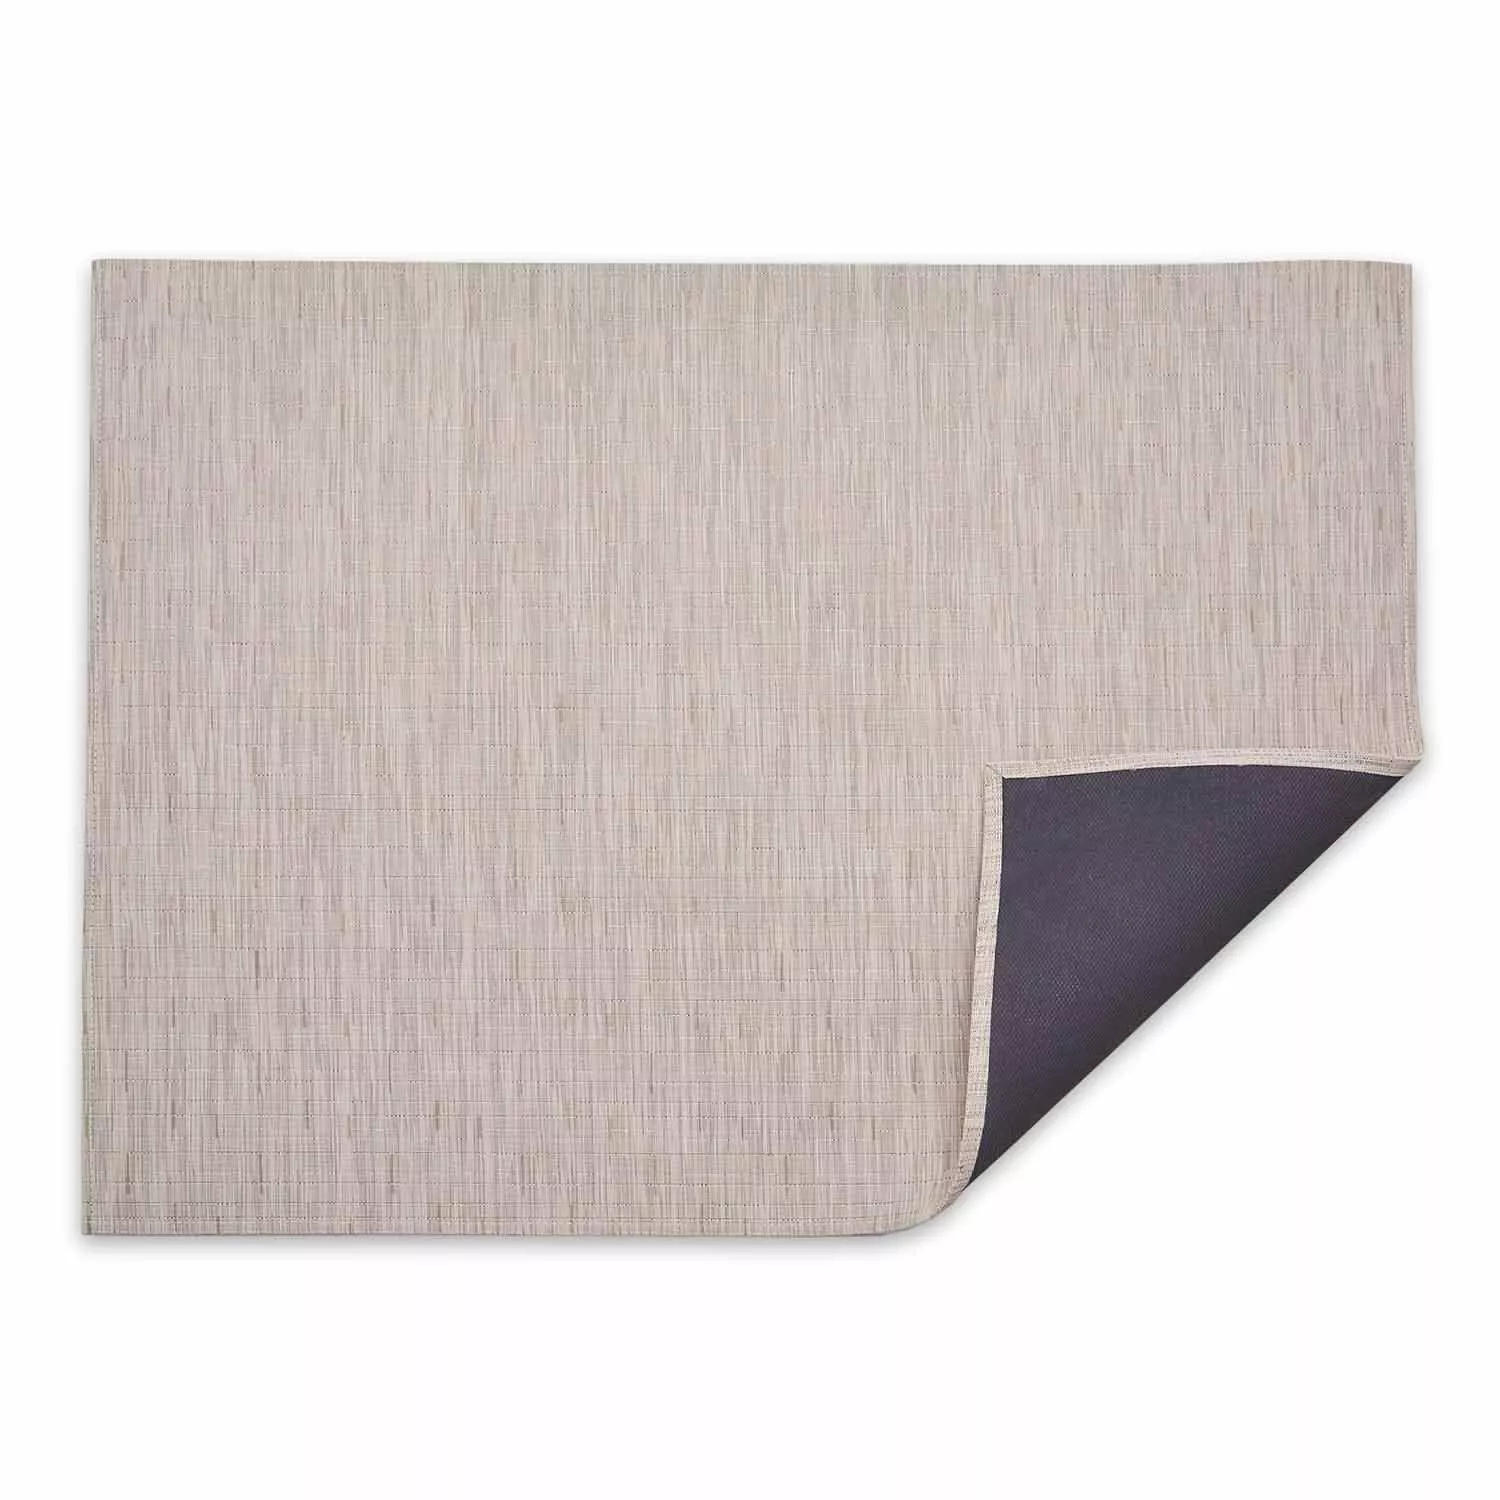 Chilewich Bamboo Rug, Oat